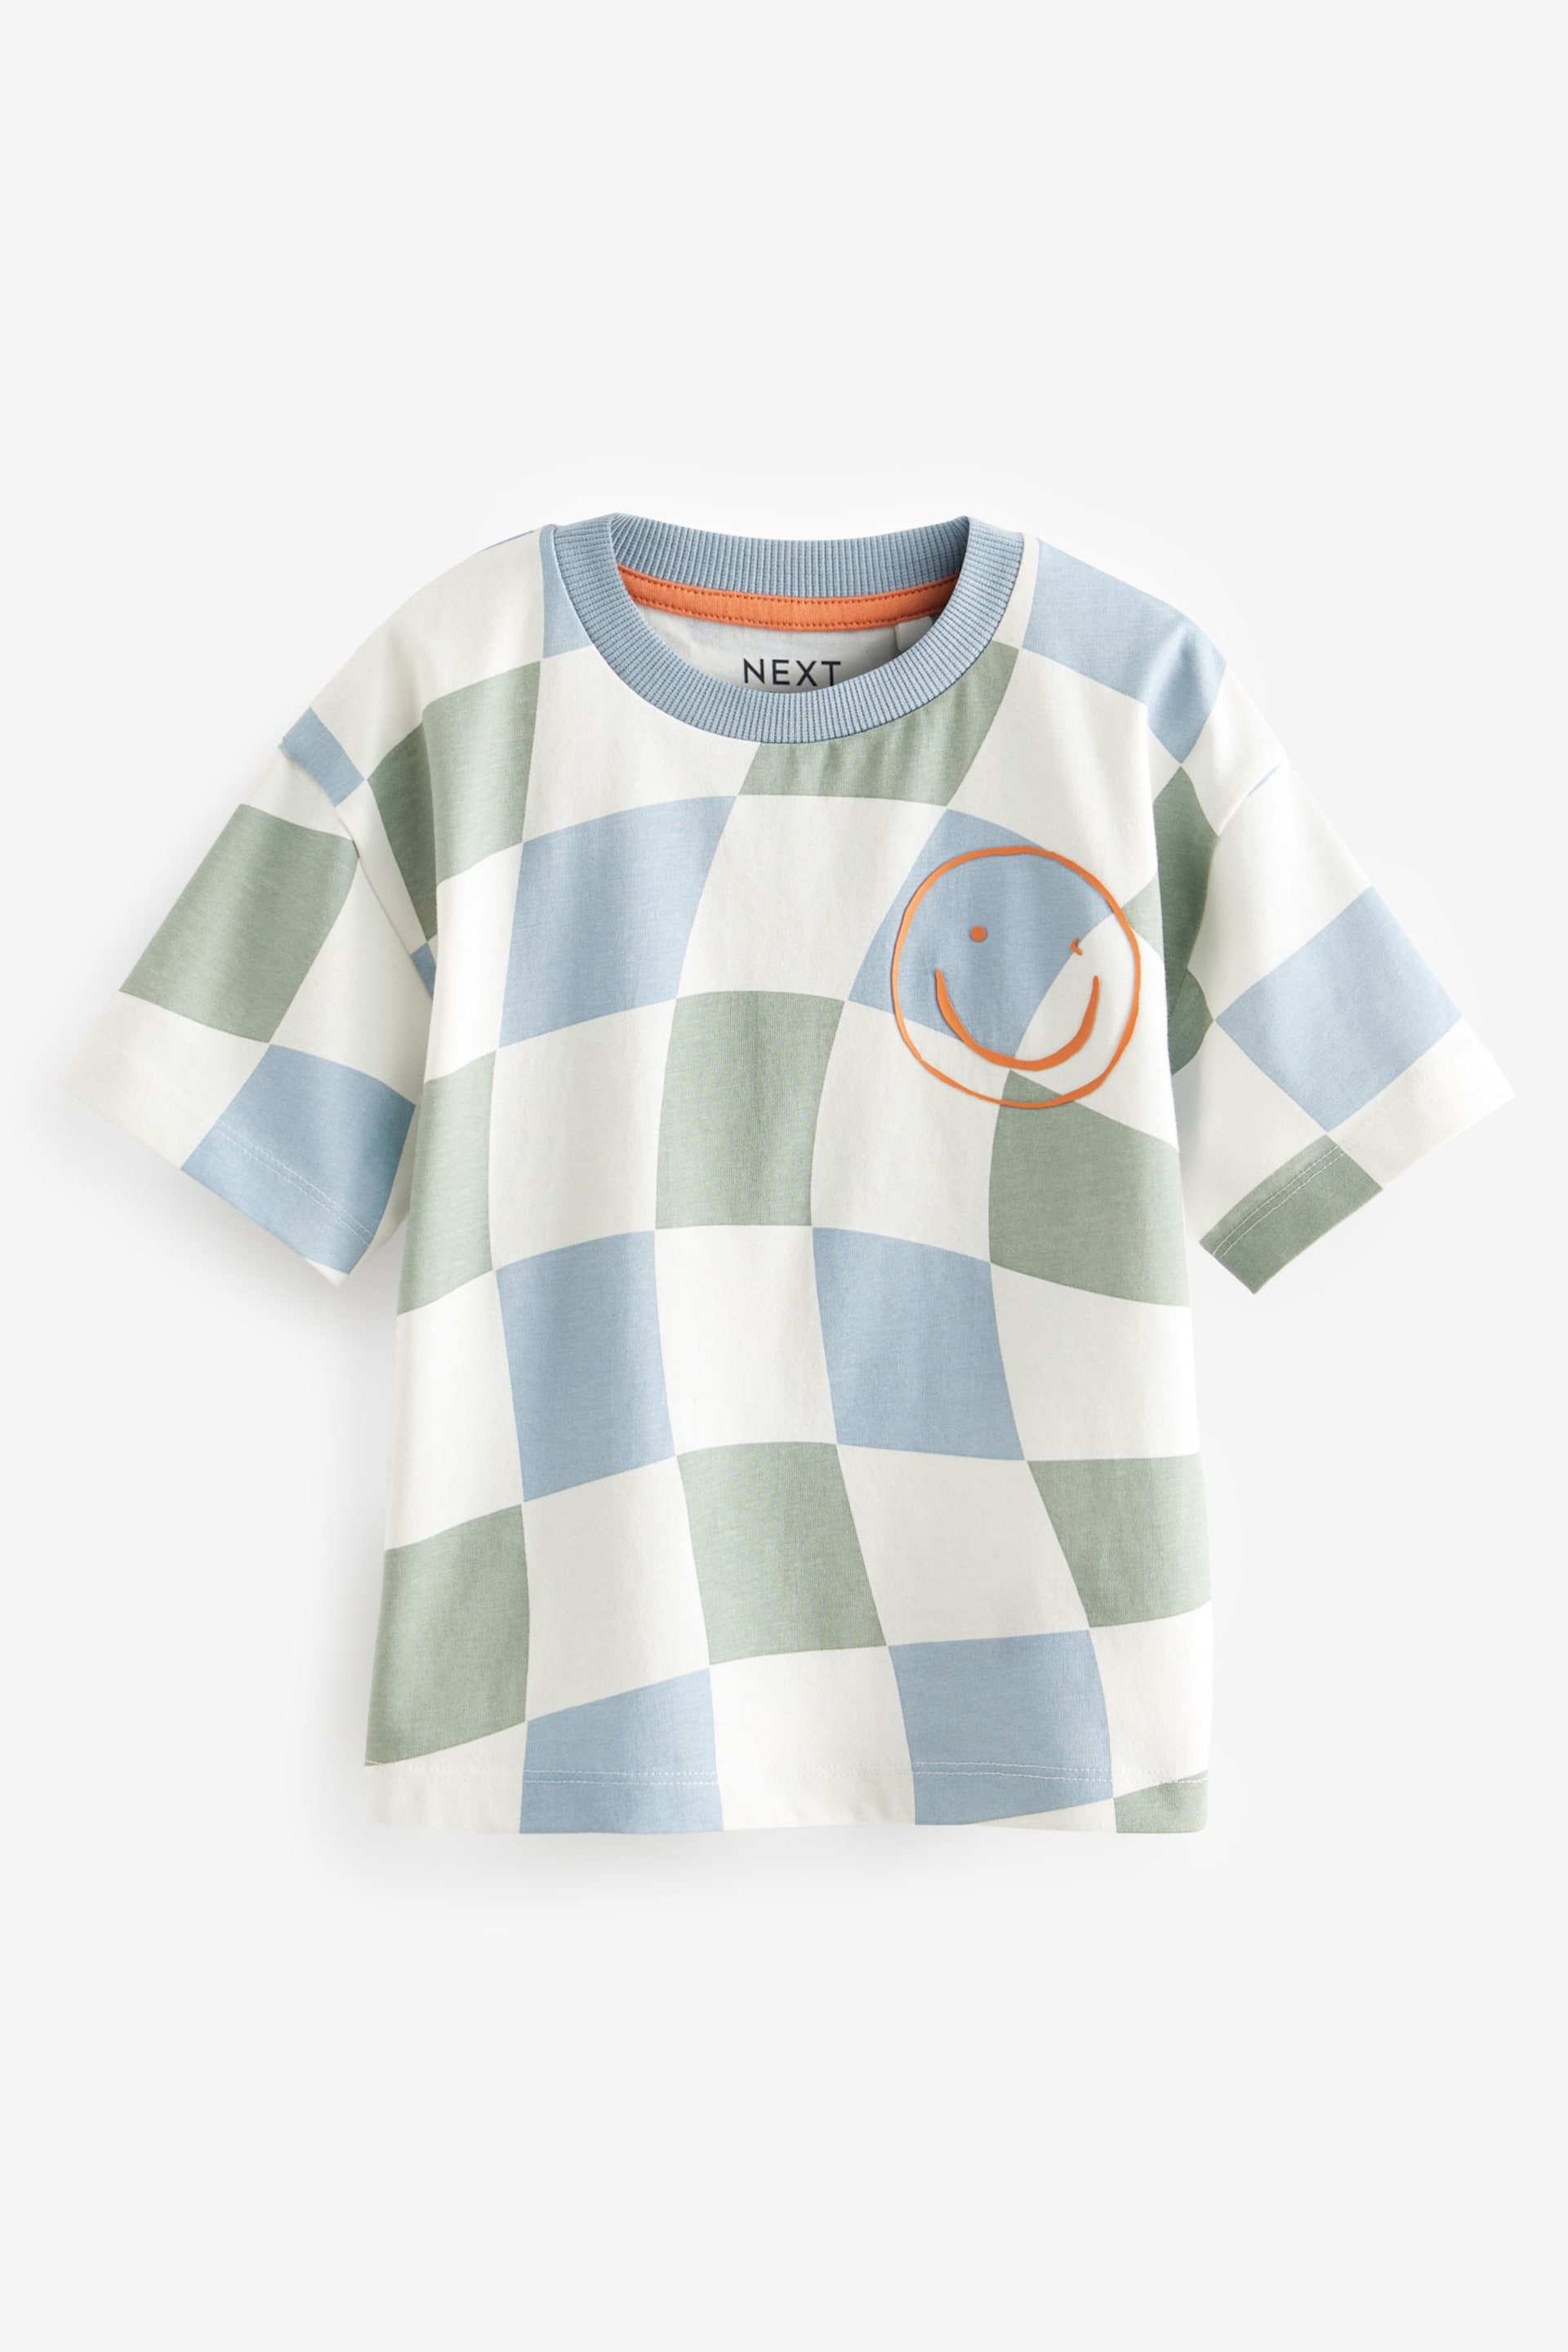 Blue/Green All-Over Print Short Sleeve T-Shirt (3mths-7yrs) - Image 1 of 3